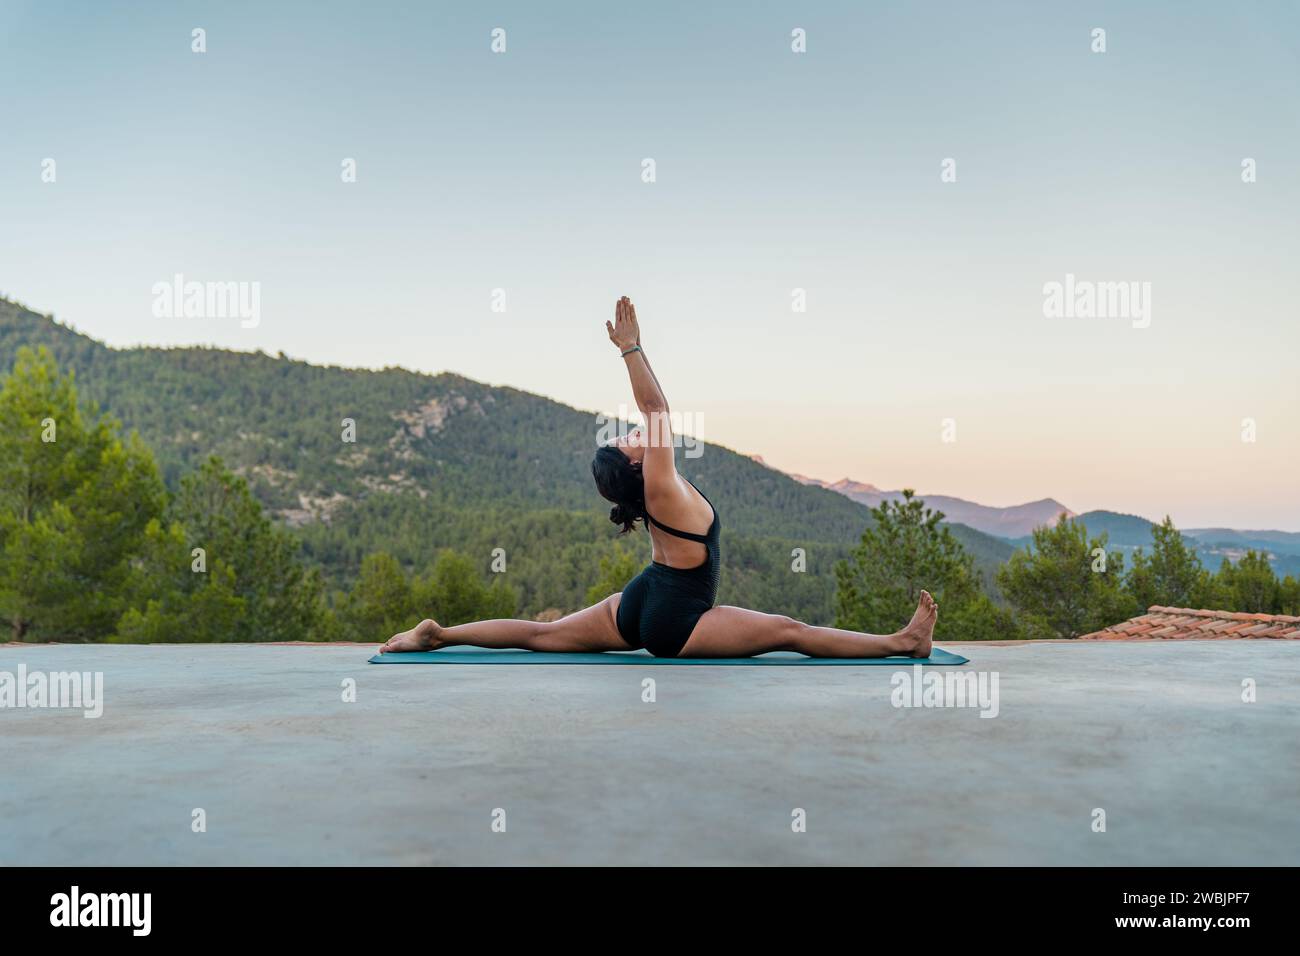 Young brunette girl practicing Hanumanasana or split pose with mountainous landscape in the background. Stock Photo